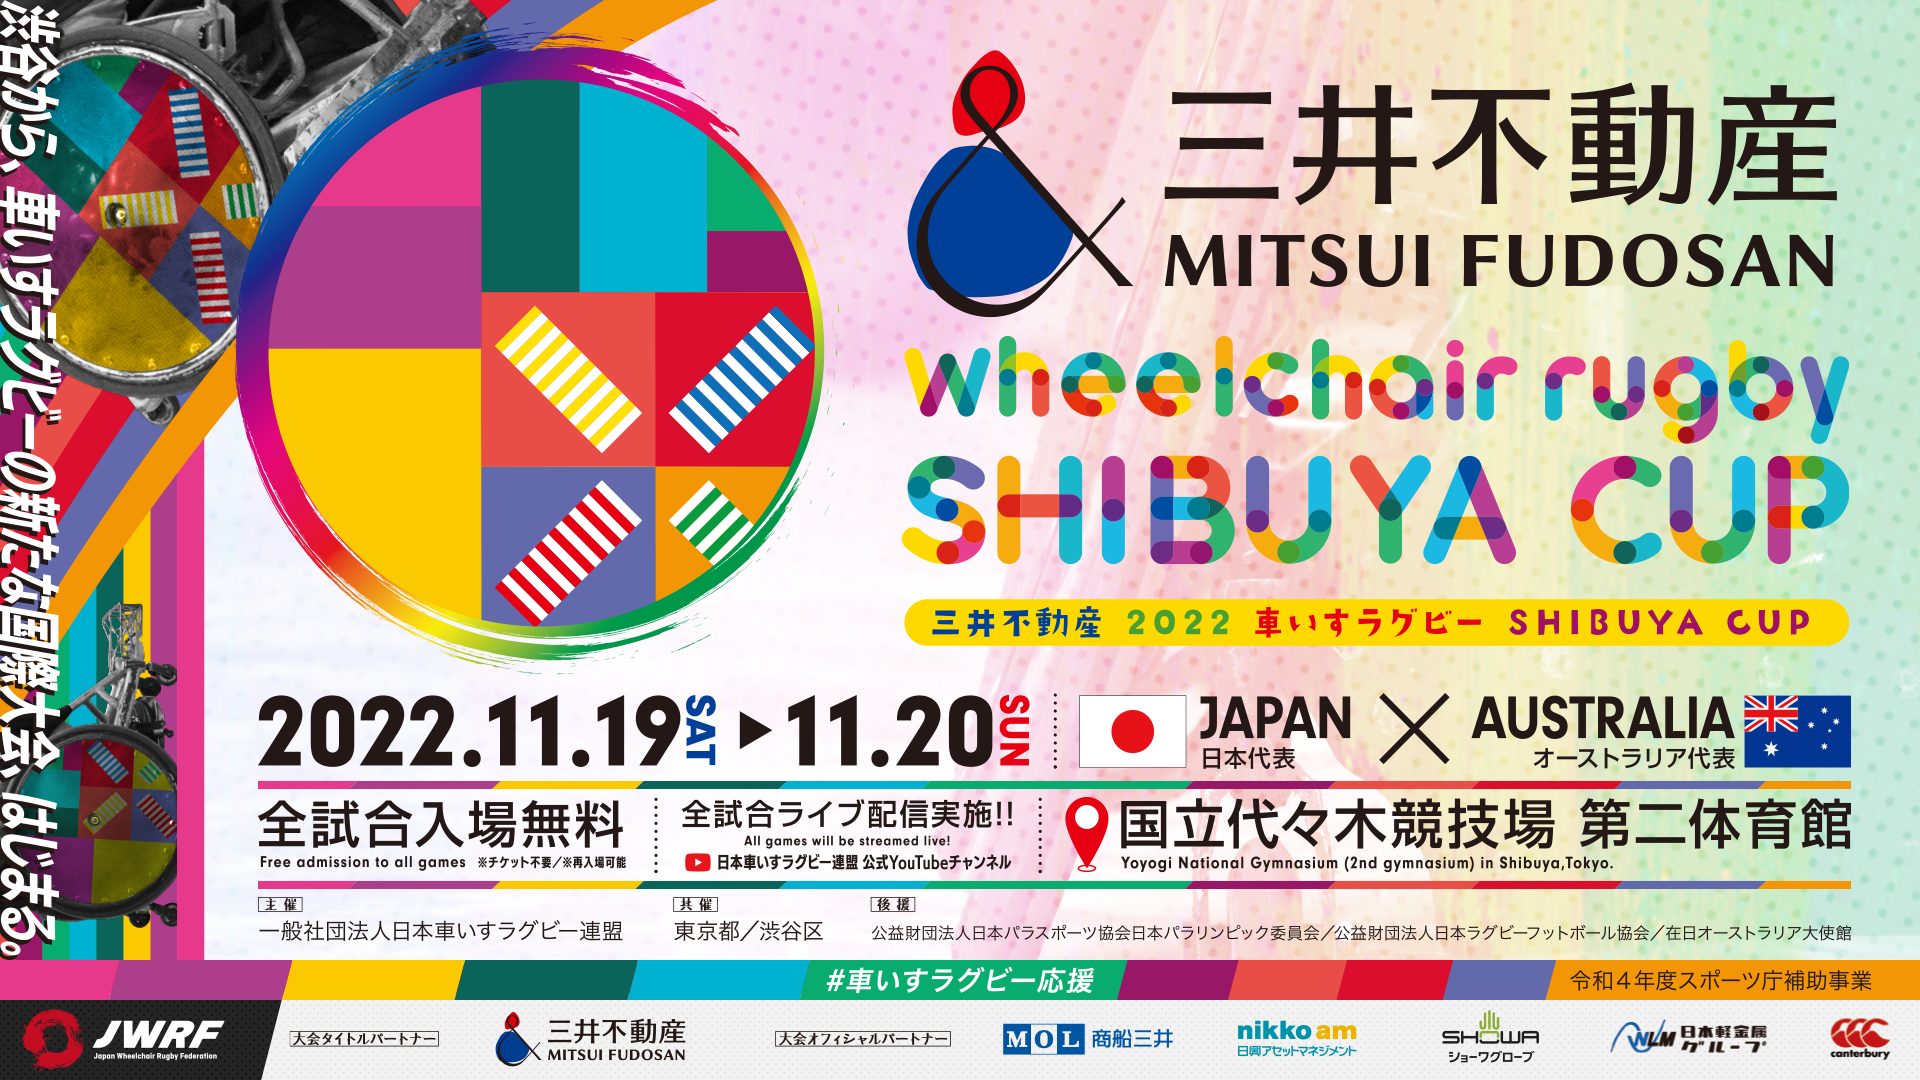 Announcement of MITSUI FUDOSAN 2022 Wheelchair Rugby SHIBUYA CUP